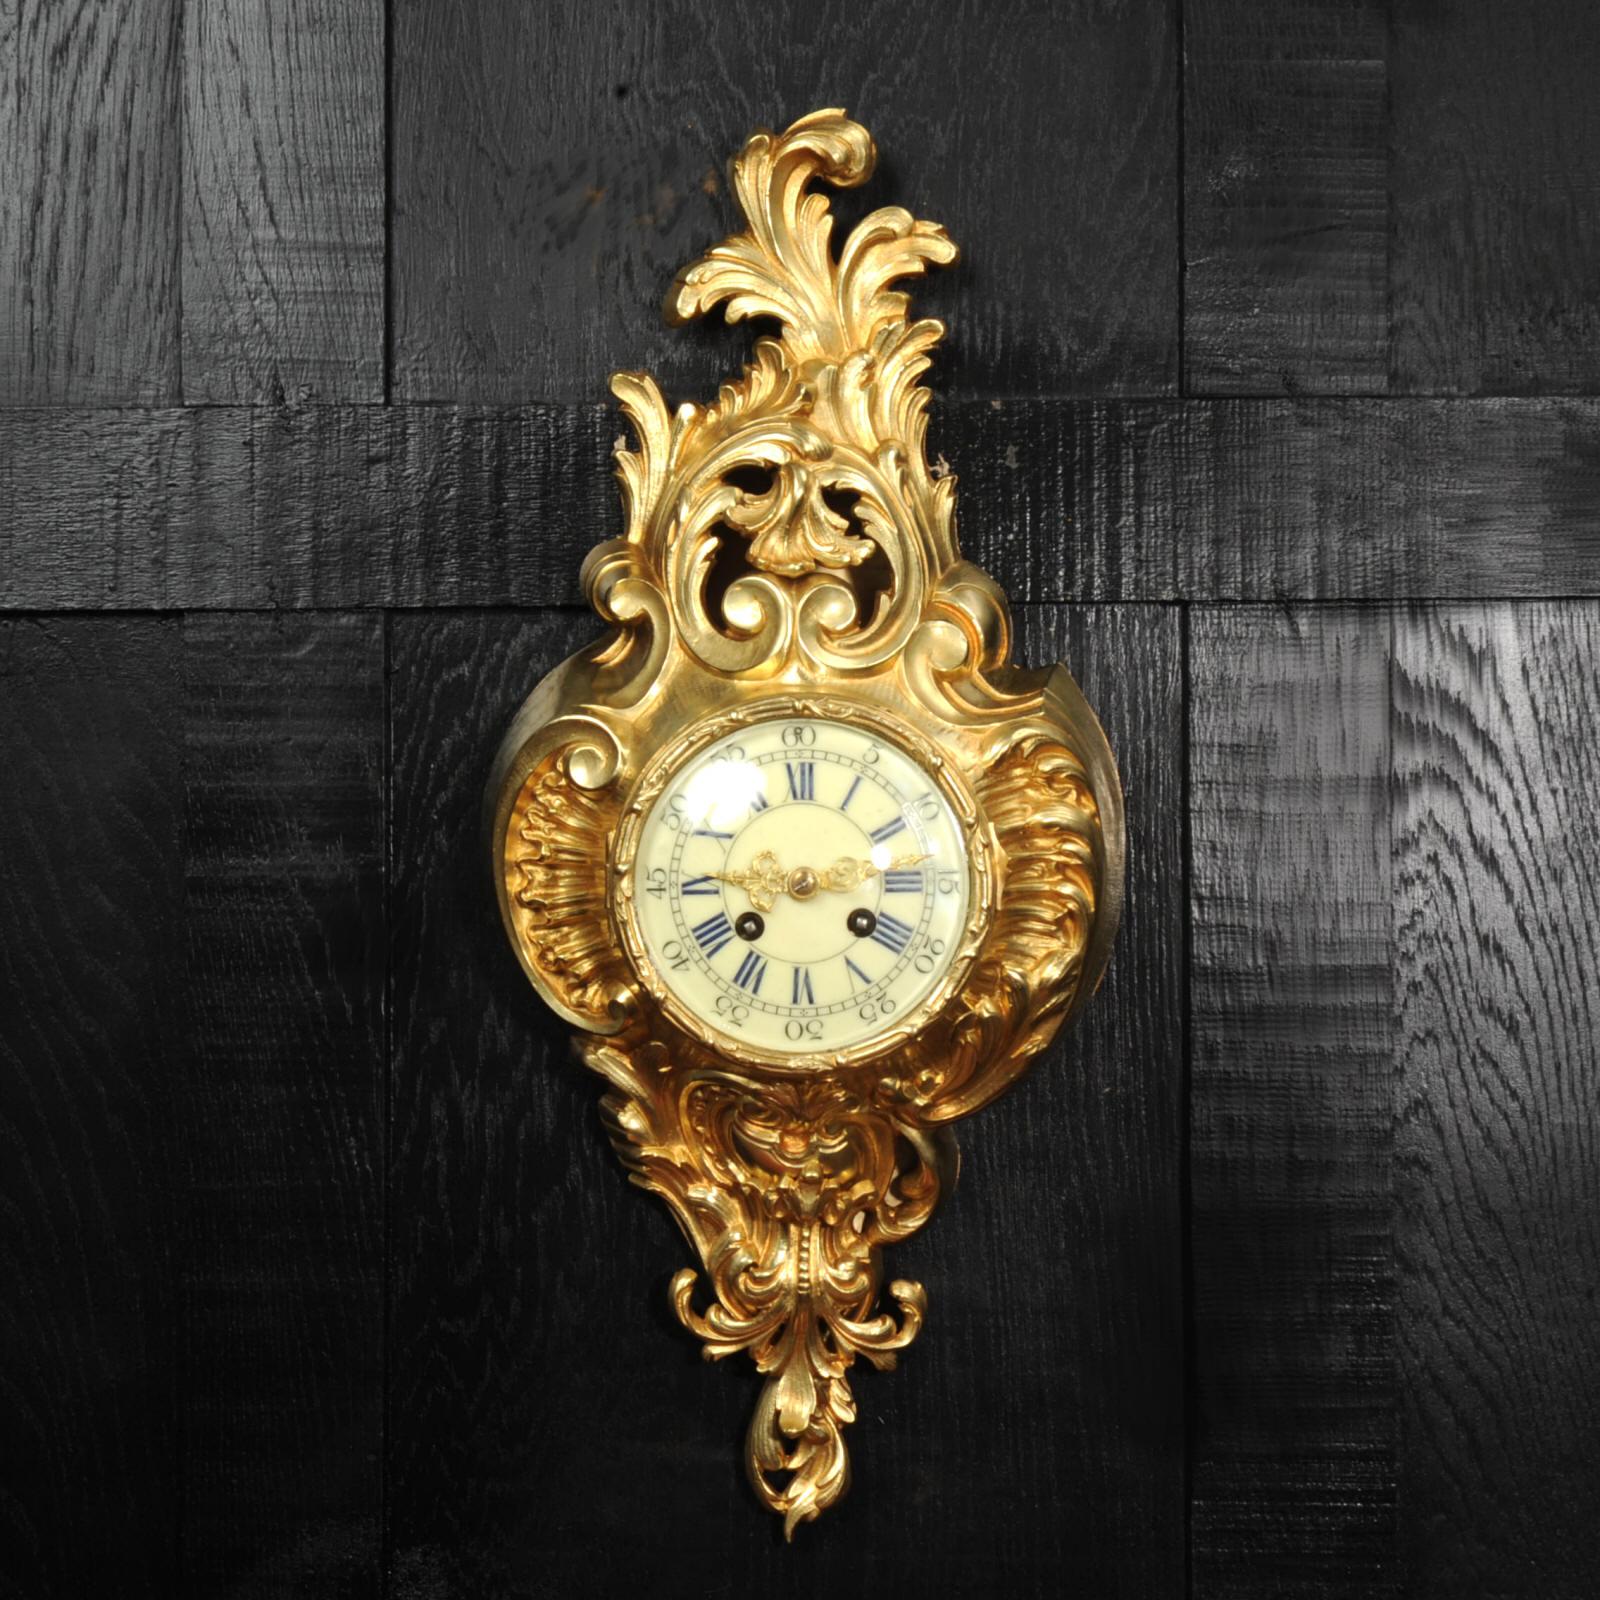 A very decorative antique French gilt bronze cartel wall clock by Vincenti, circa 1870. It is Rococo in style, asymmetric with acanthus shoulders and a large acanthus leaf top. Acanthus flowers hang below the dial. It is in stunning condition,